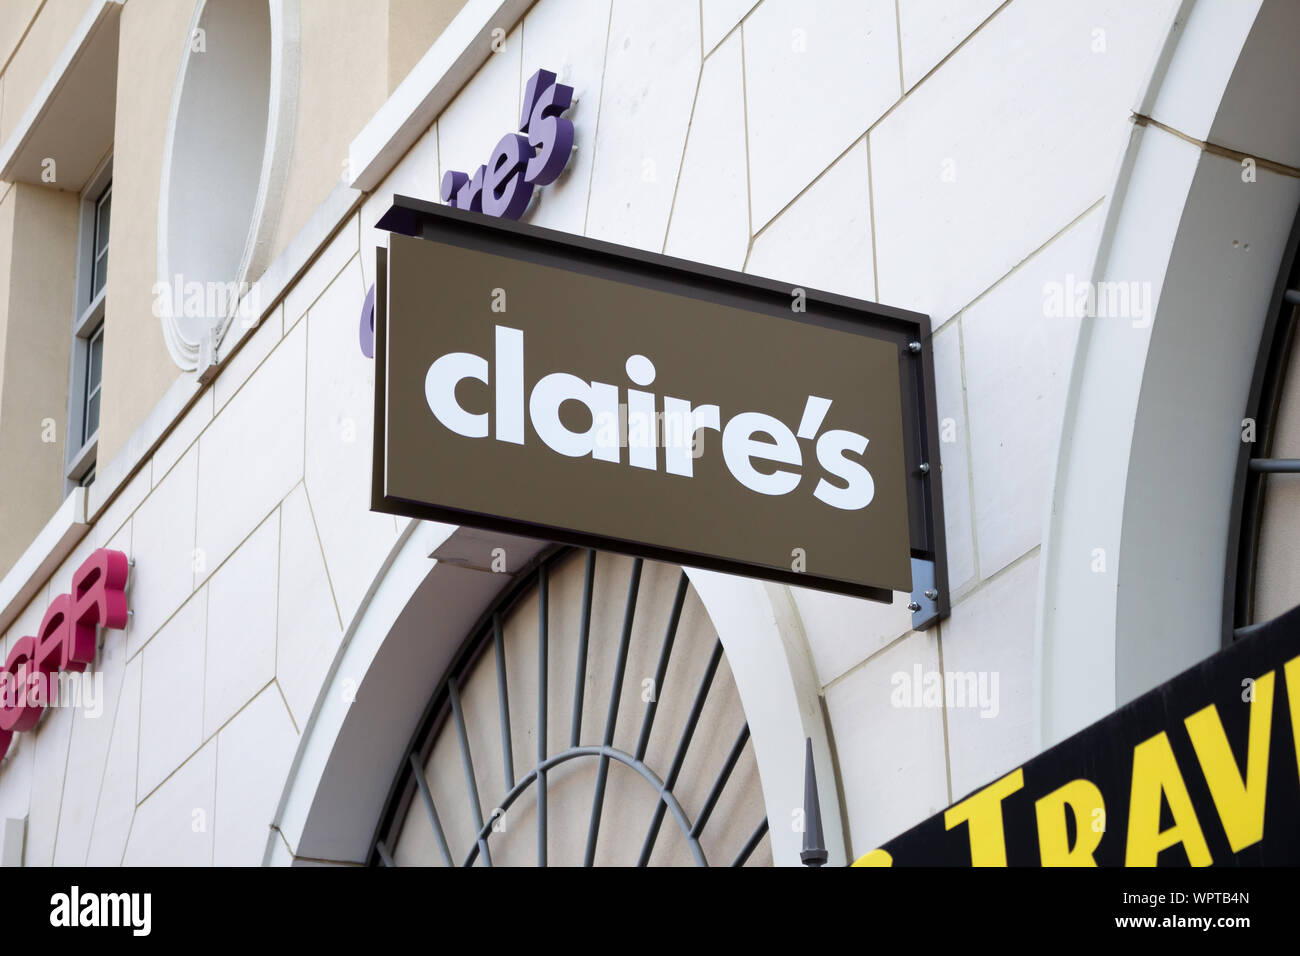 Los Angeles, California, United States - 02-22-2019: A view of a store front sign for the jewelry company known as Claire's. Stock Photo